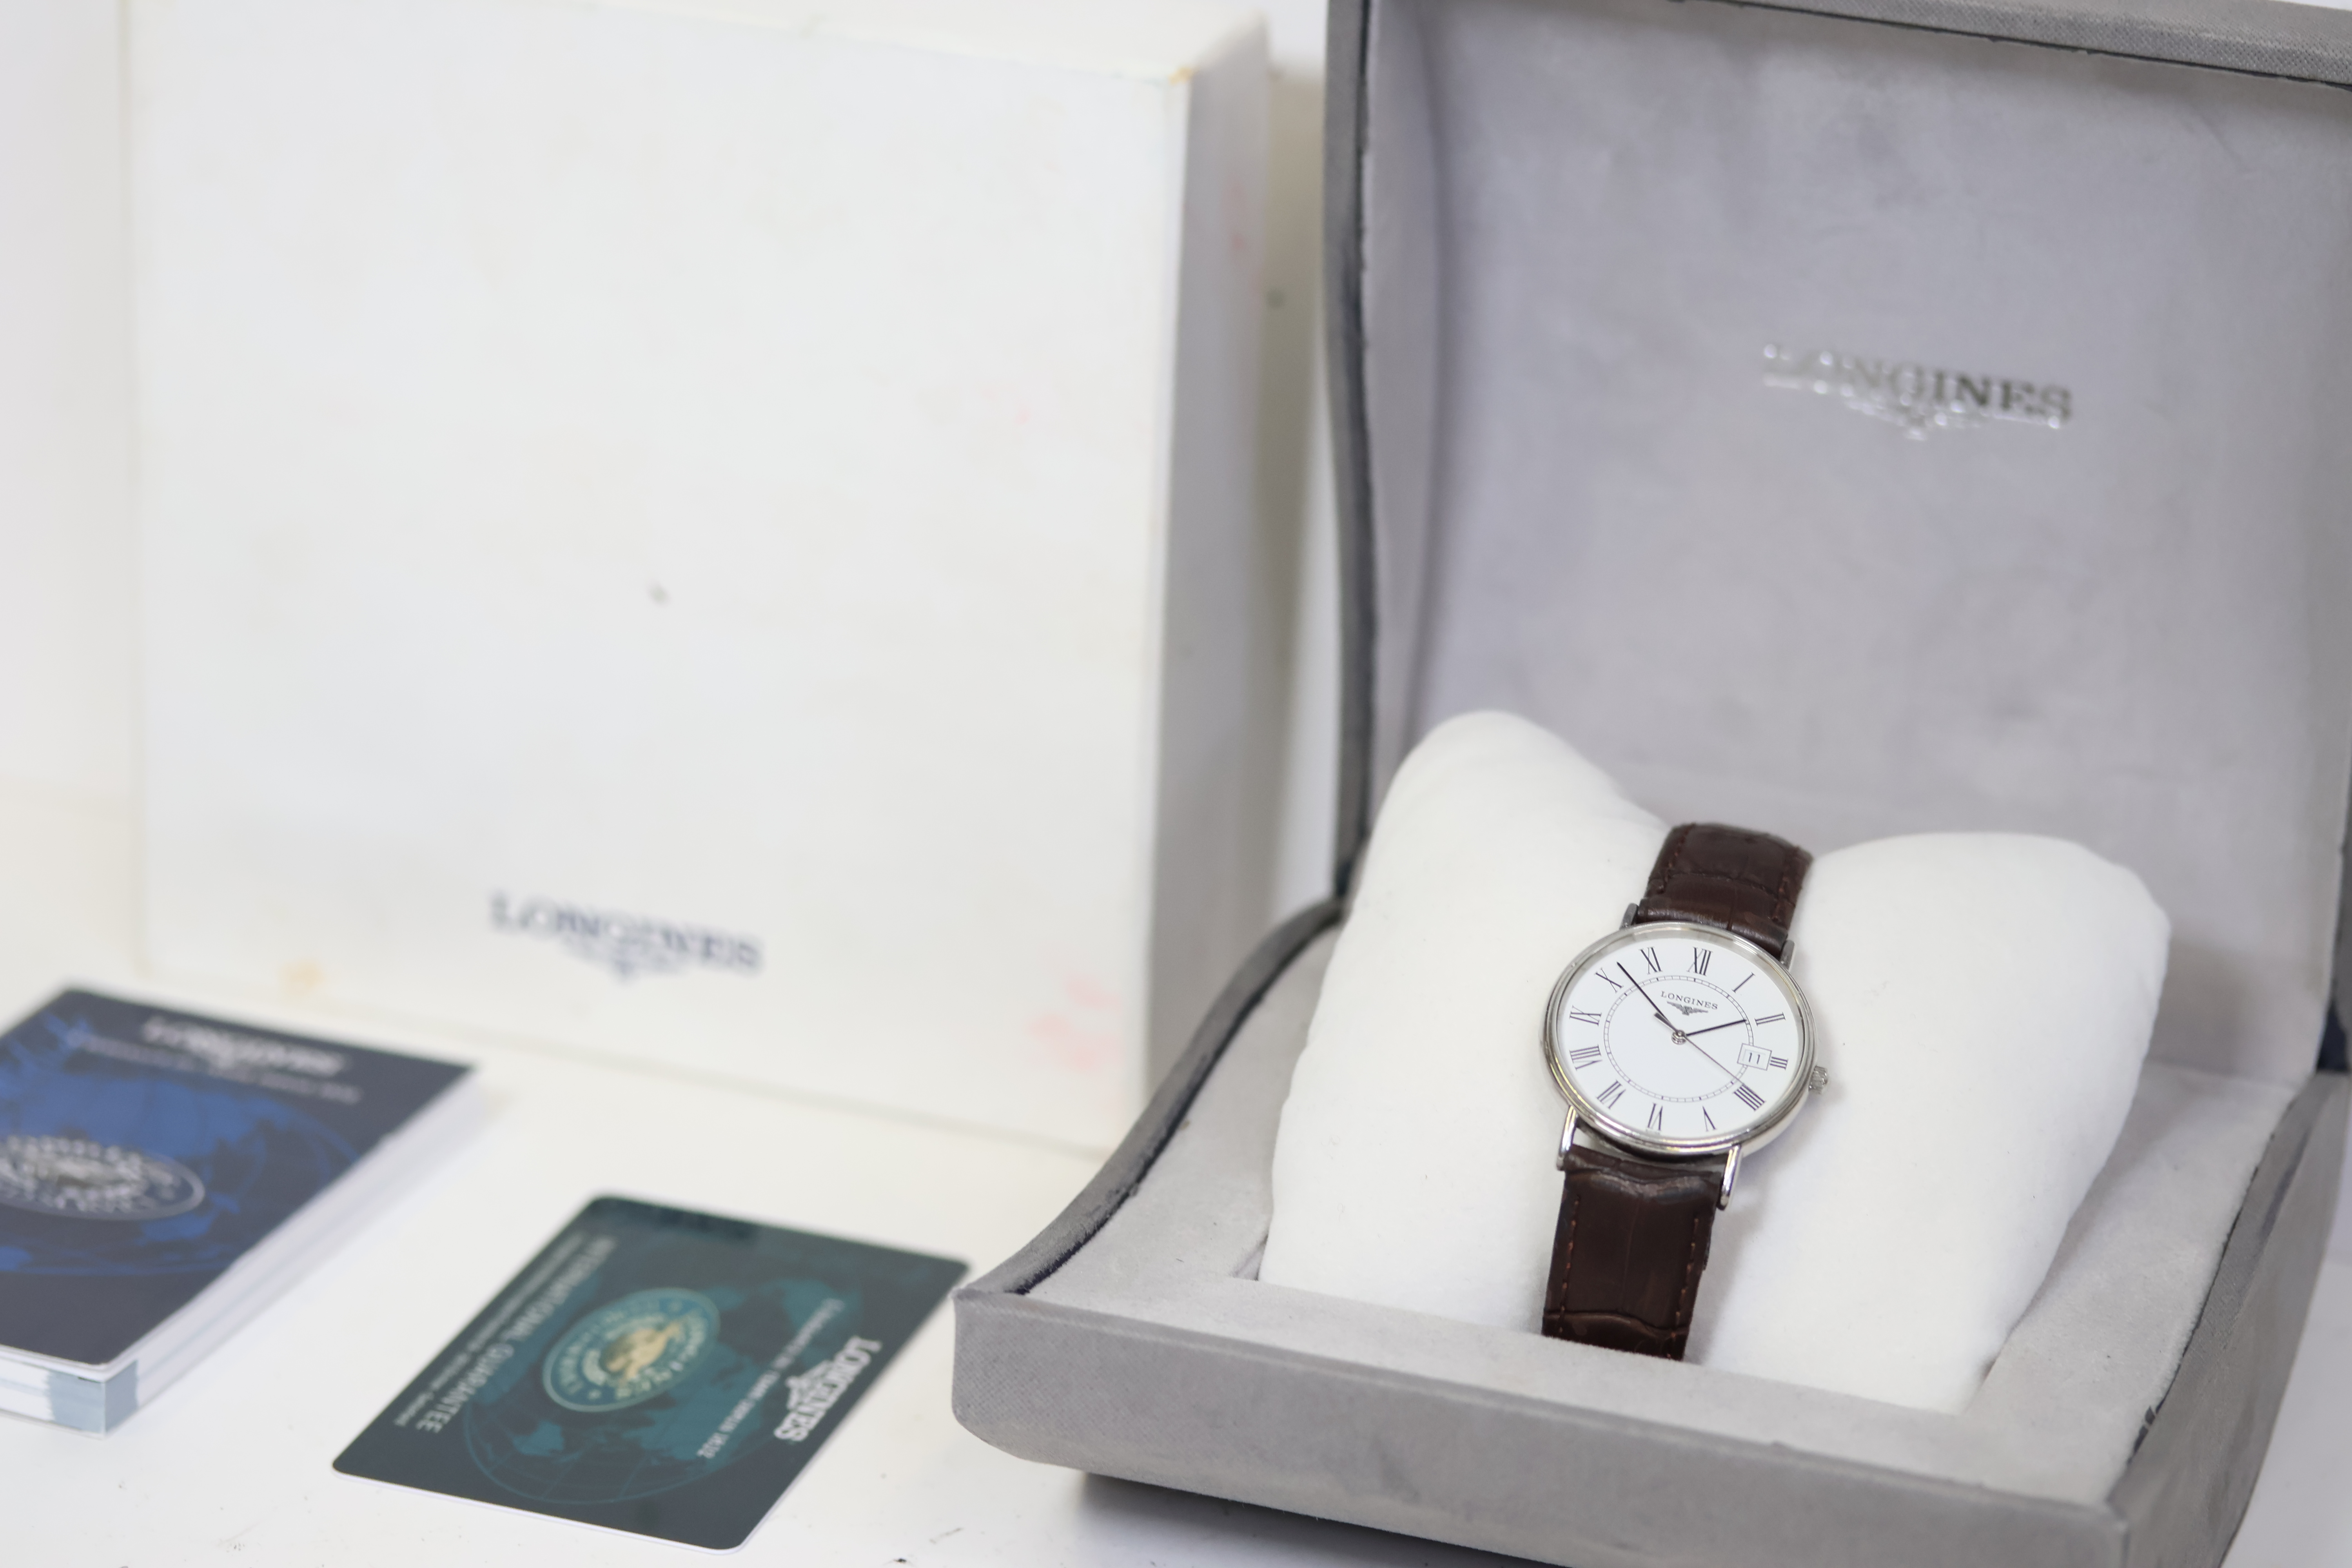 LONGINES LE GRANDE CLASSIQUE PRESENCE QUARTZ WATCH, REFERENCE L4.720.4, WITH BOX AND PAPERS 2006.